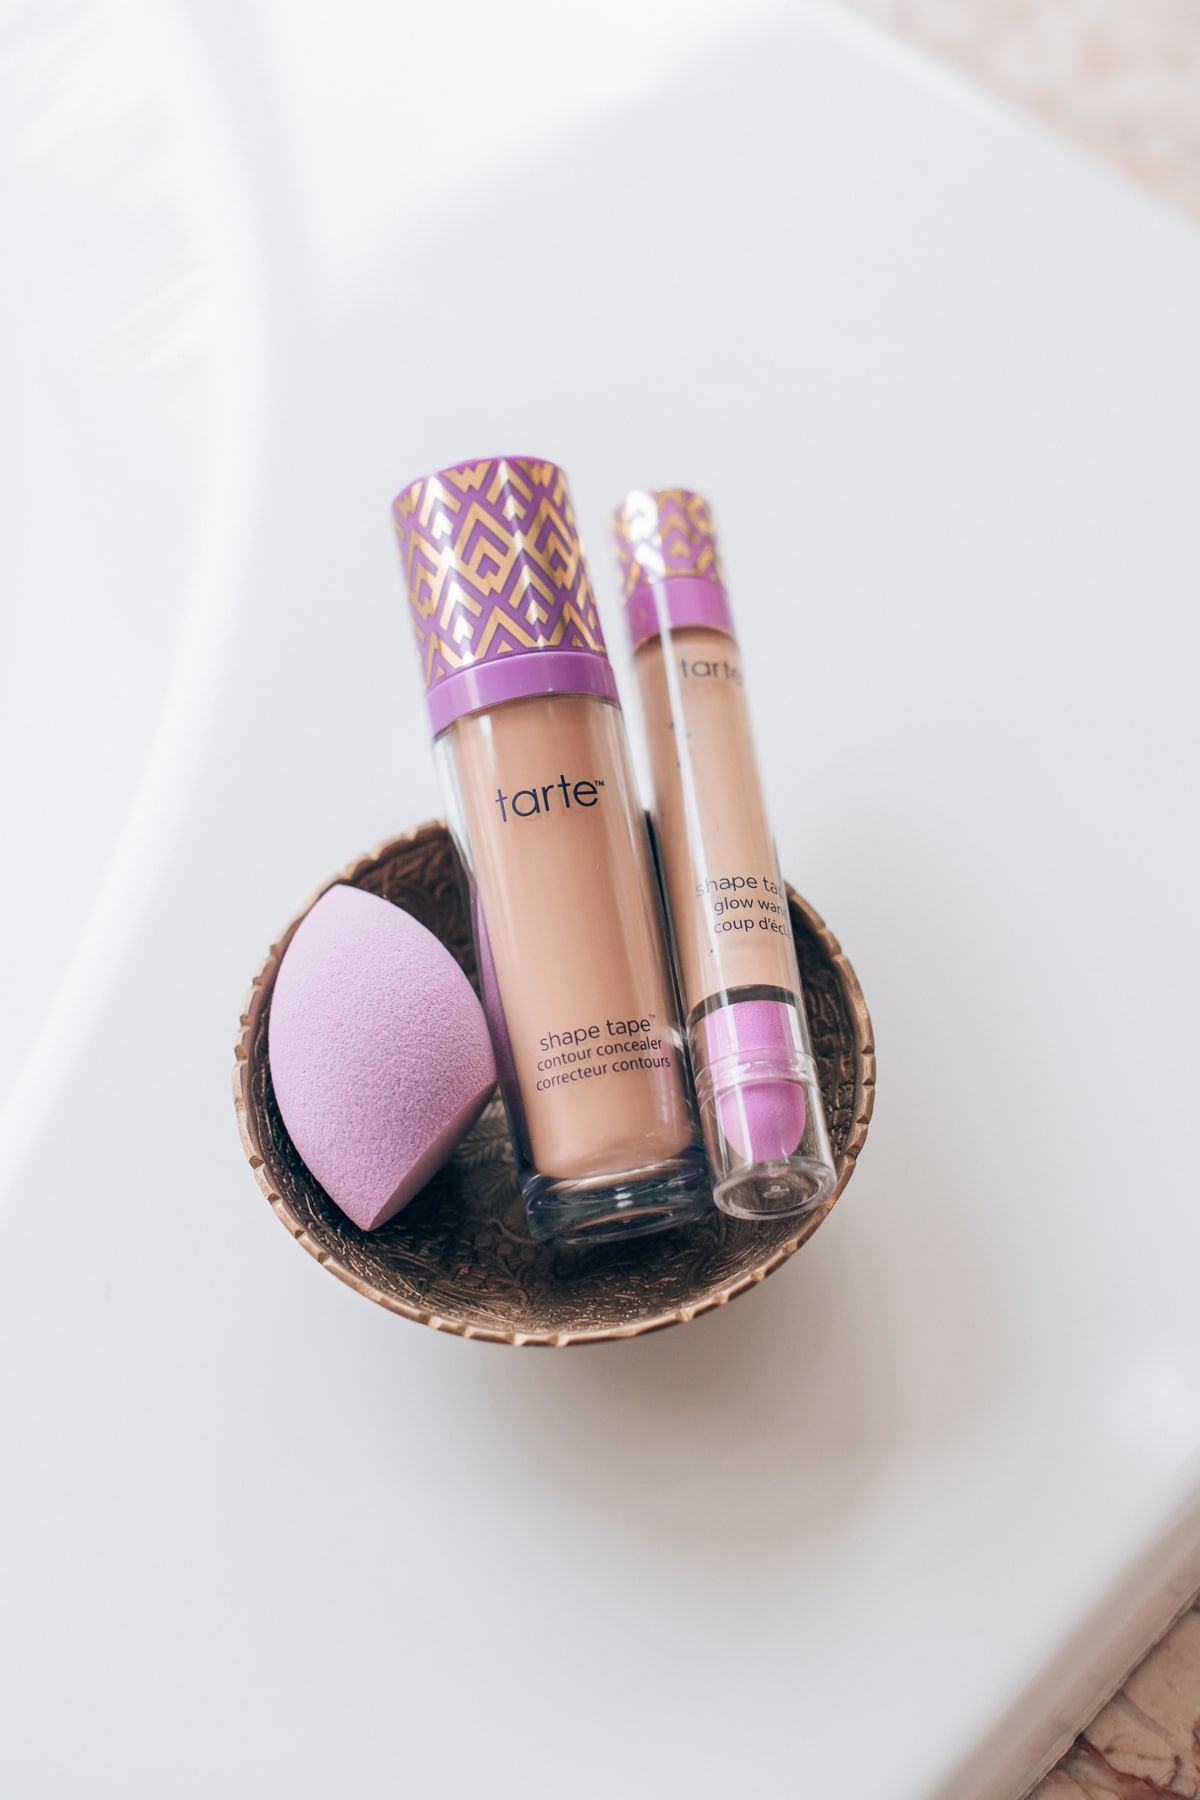 Best Concealer for Dark Spots, by Blogger What The Fab